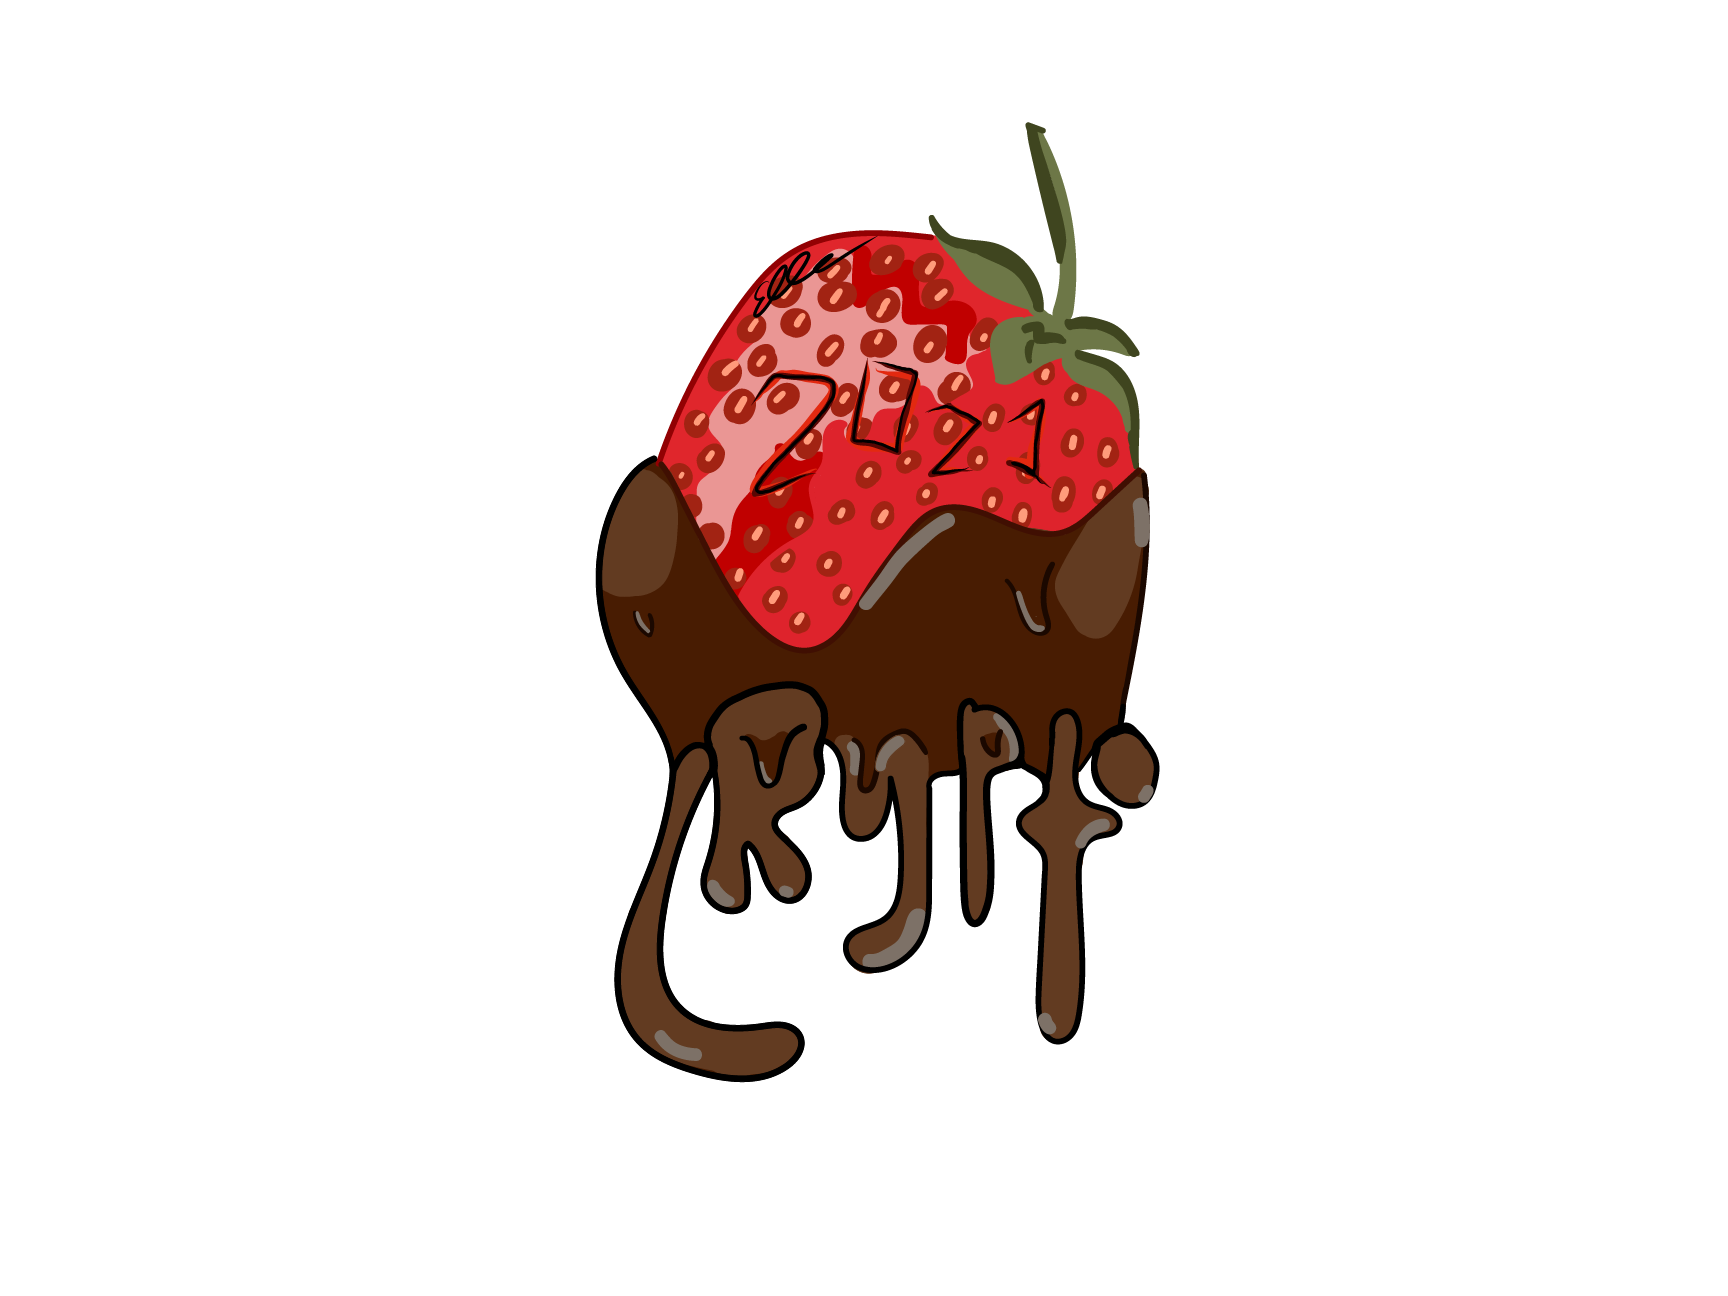 a strawberry with 2021 carved into it, dripping chocolate that forms the word Crypto